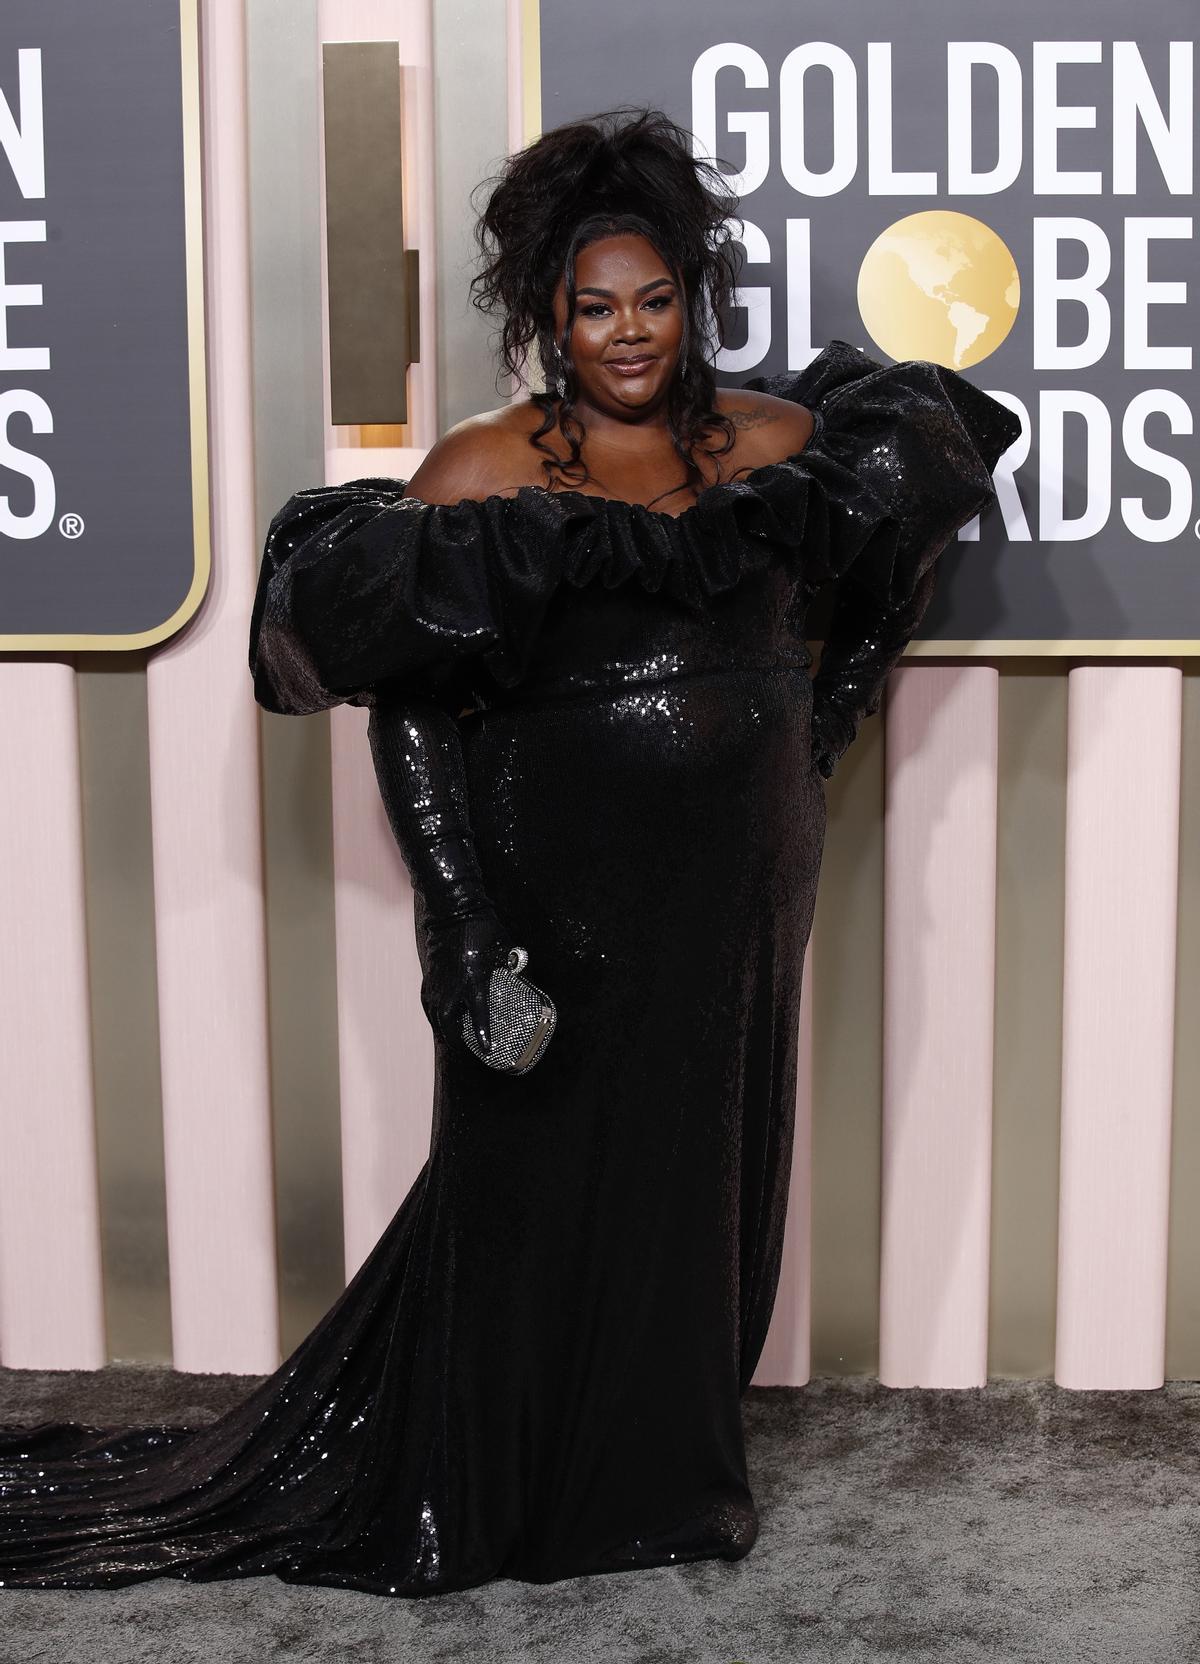 Beverly Hills (United States), 10/01/2023.- Nicole Byer arrives for the 80th annual Golden Globe Awards ceremony at the Beverly Hilton Hotel, in Beverly Hills, California, USA, 10 January 2023. Artists in various film and television categories are awarded Golden Globes by the Hollywood Foreign Press Association. (Estados Unidos) EFE/EPA/CAROLINE BREHMAN